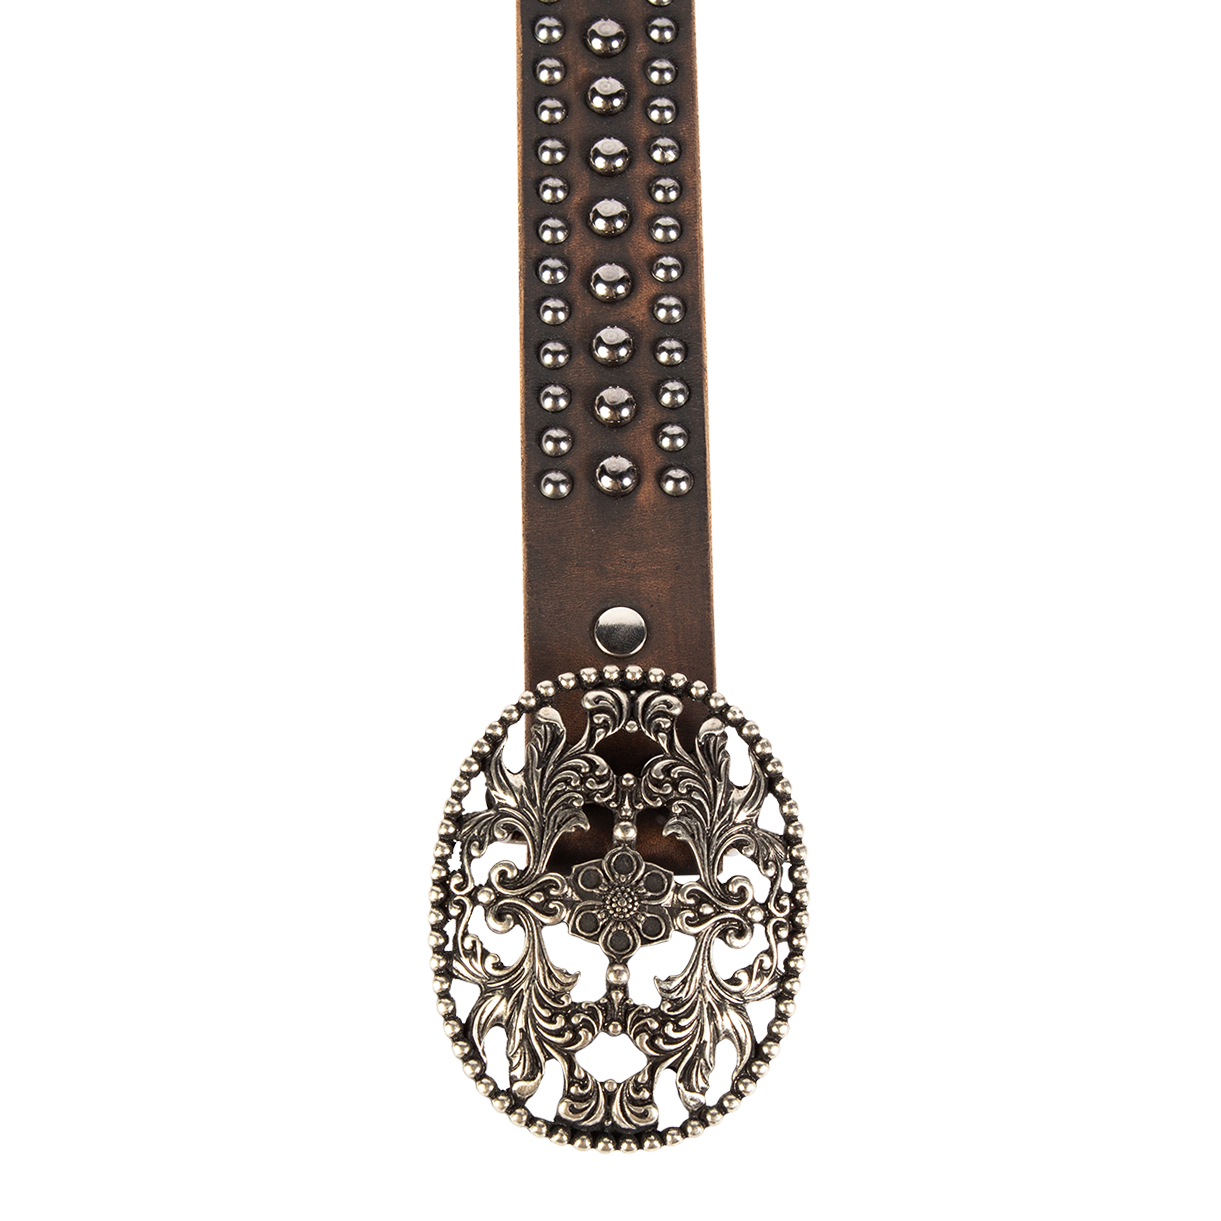 Iron black distressed top view featuring large cut out metal buckle closure and embroidered detailing on FREEBIRD full grain leather belt